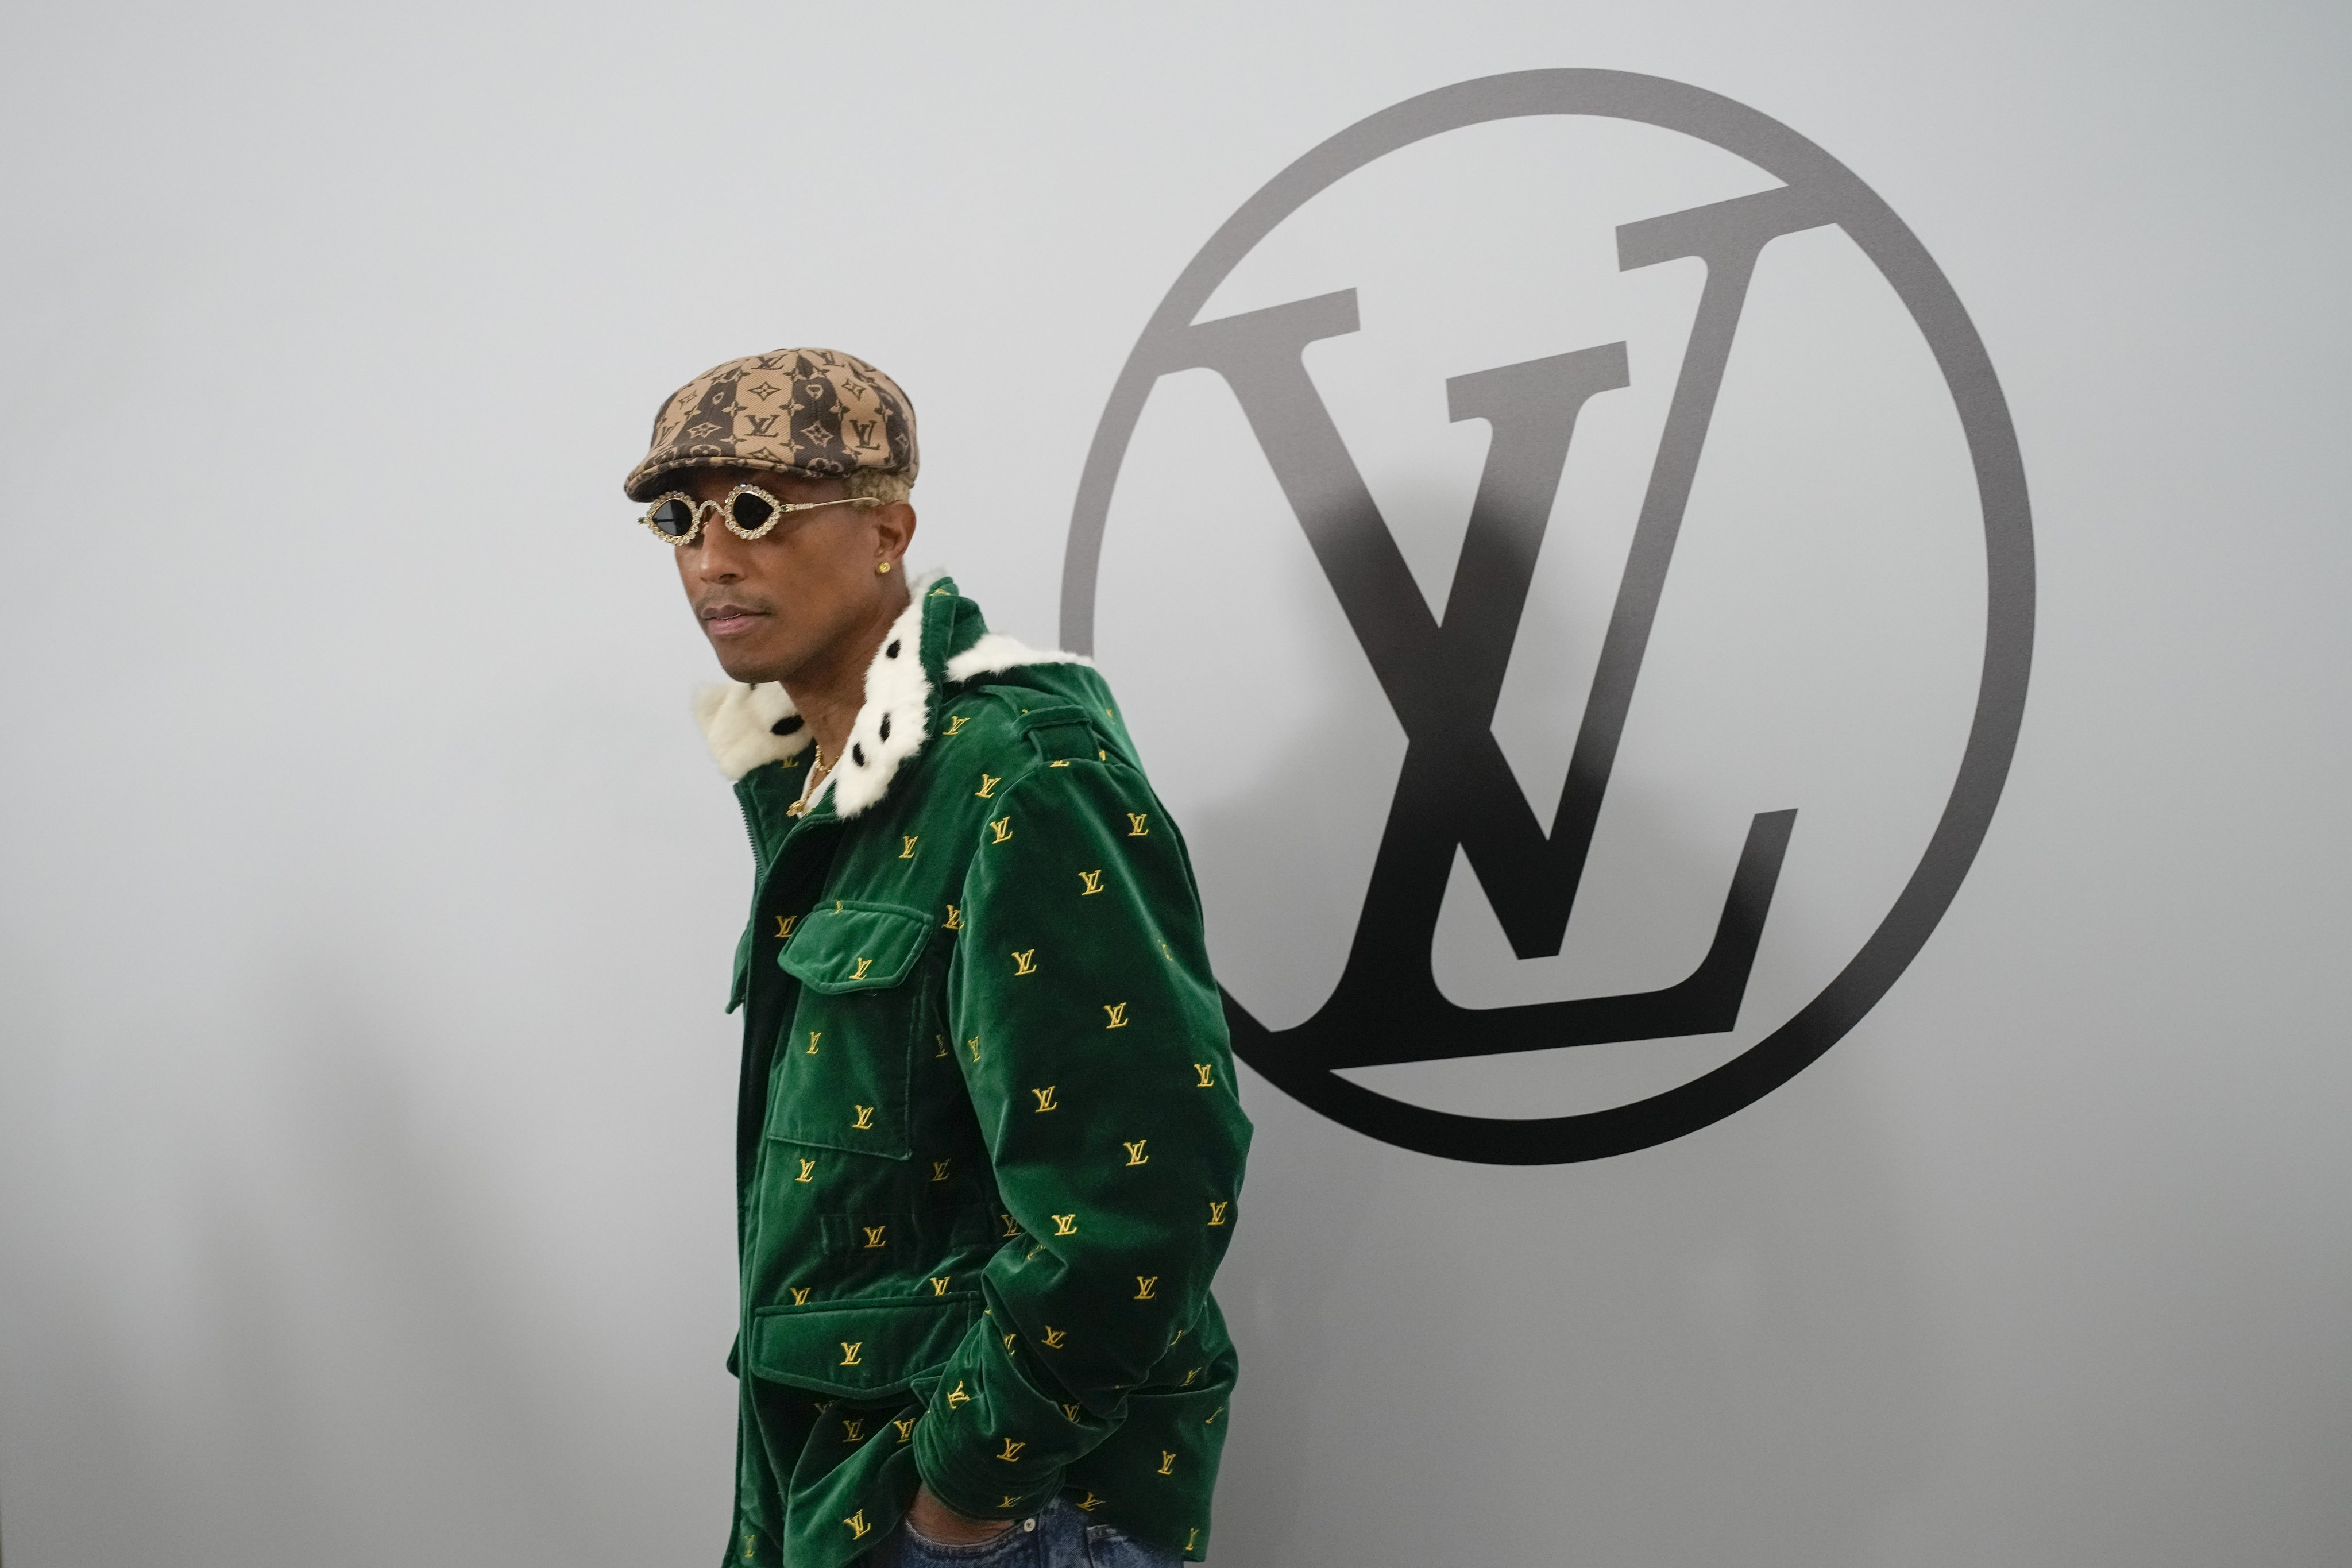 Pharrell Williams attends the Louis Vuitton autumn/winter 2023-2024 ready-to-wear collection show in March 2023 in Paris. The signs of hip-hop’s influence are now everywhere, from luxury brands like Louis Vuitton to food and lifestyle products. Photo: AP